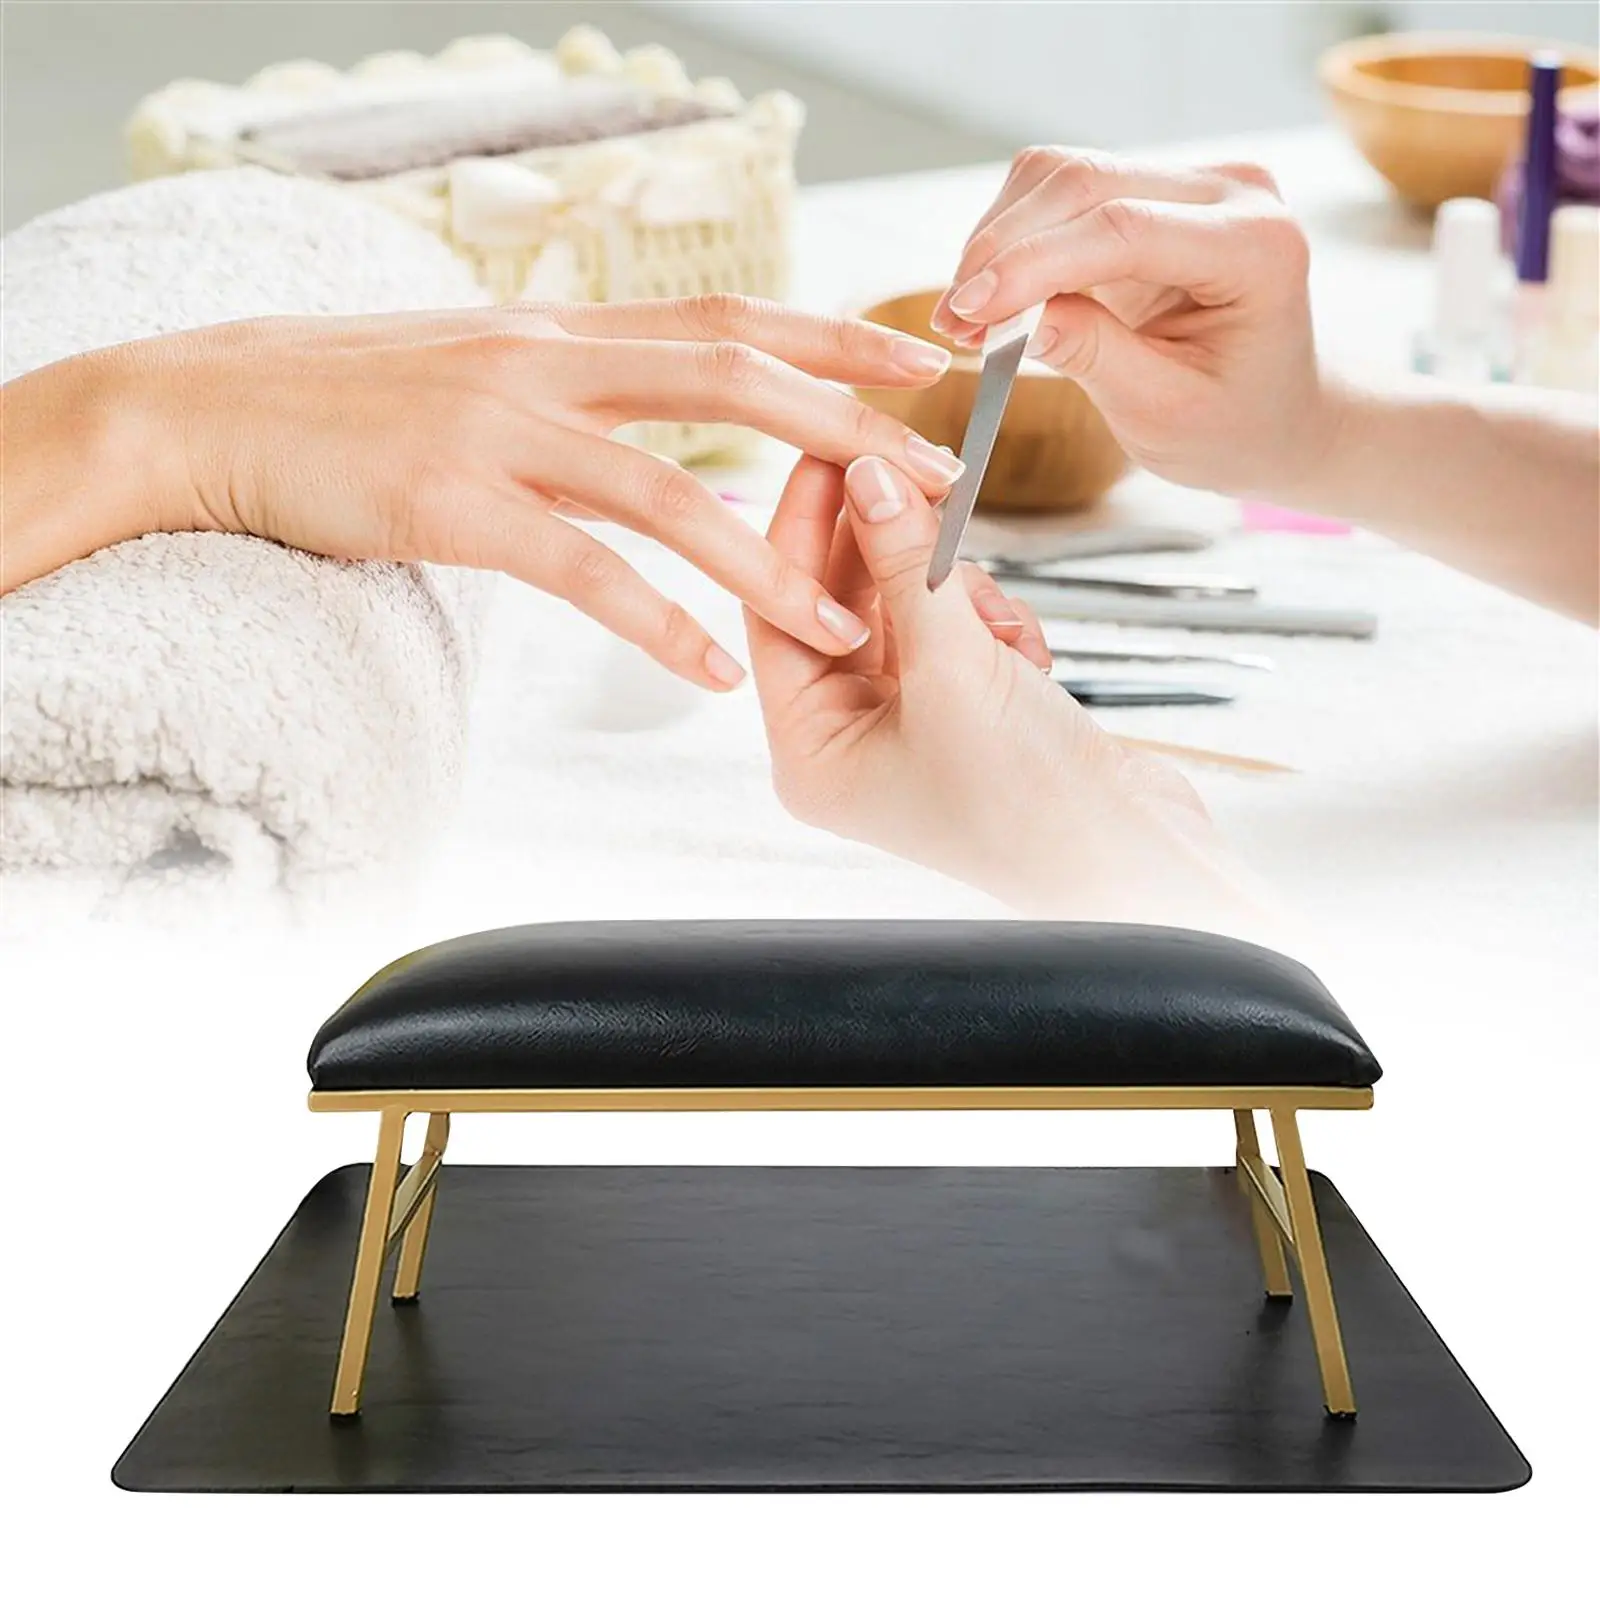 Nail Pillow and Mat Manicure Tool PU Leather Table Comfortable Nail Table Mat Nail Hand Rest Cushion for Manicurist Hand Nail